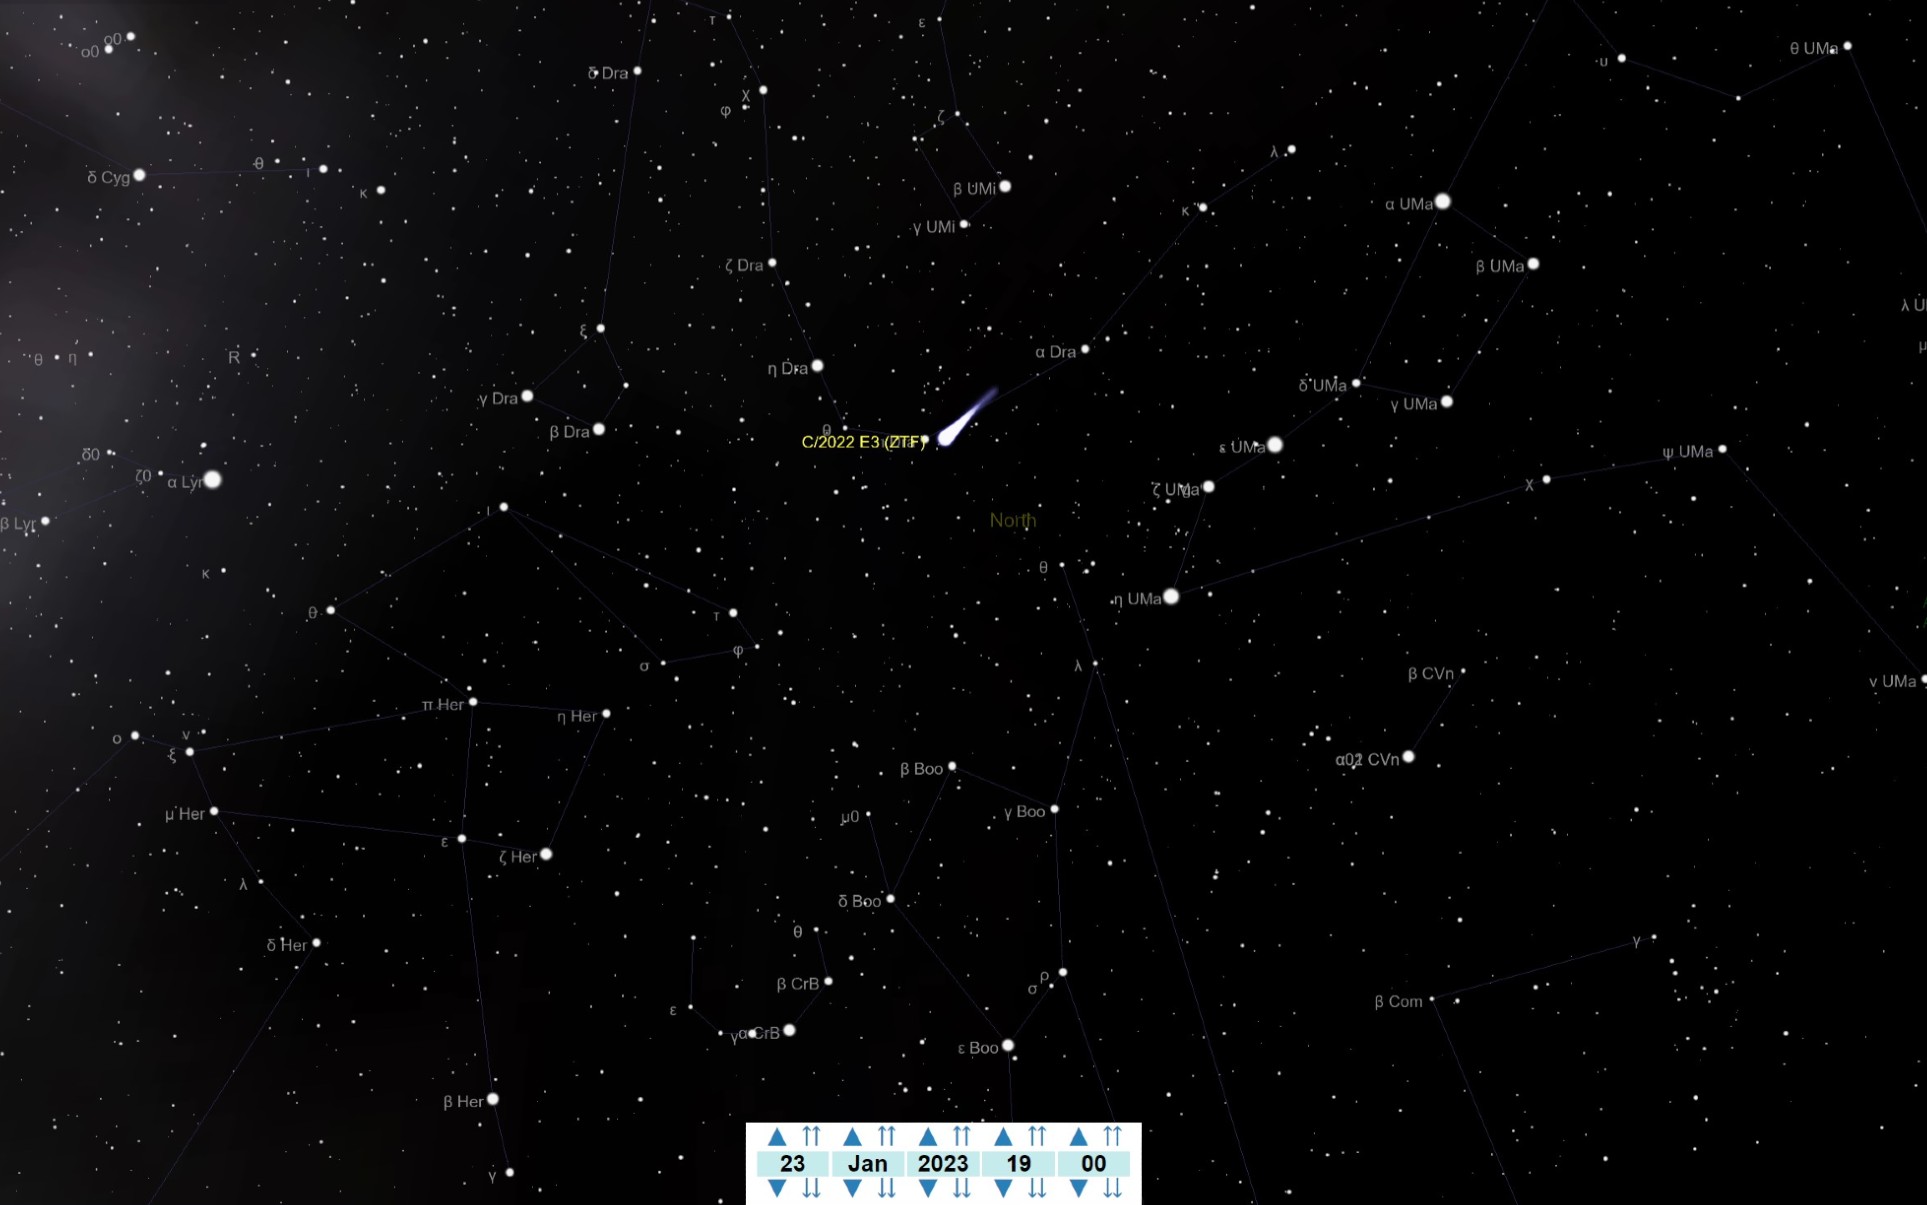 An illustration of the night sky on January 23rd showing the position of Comet C/2022 E3 (ZTF) near the constellation Draco.